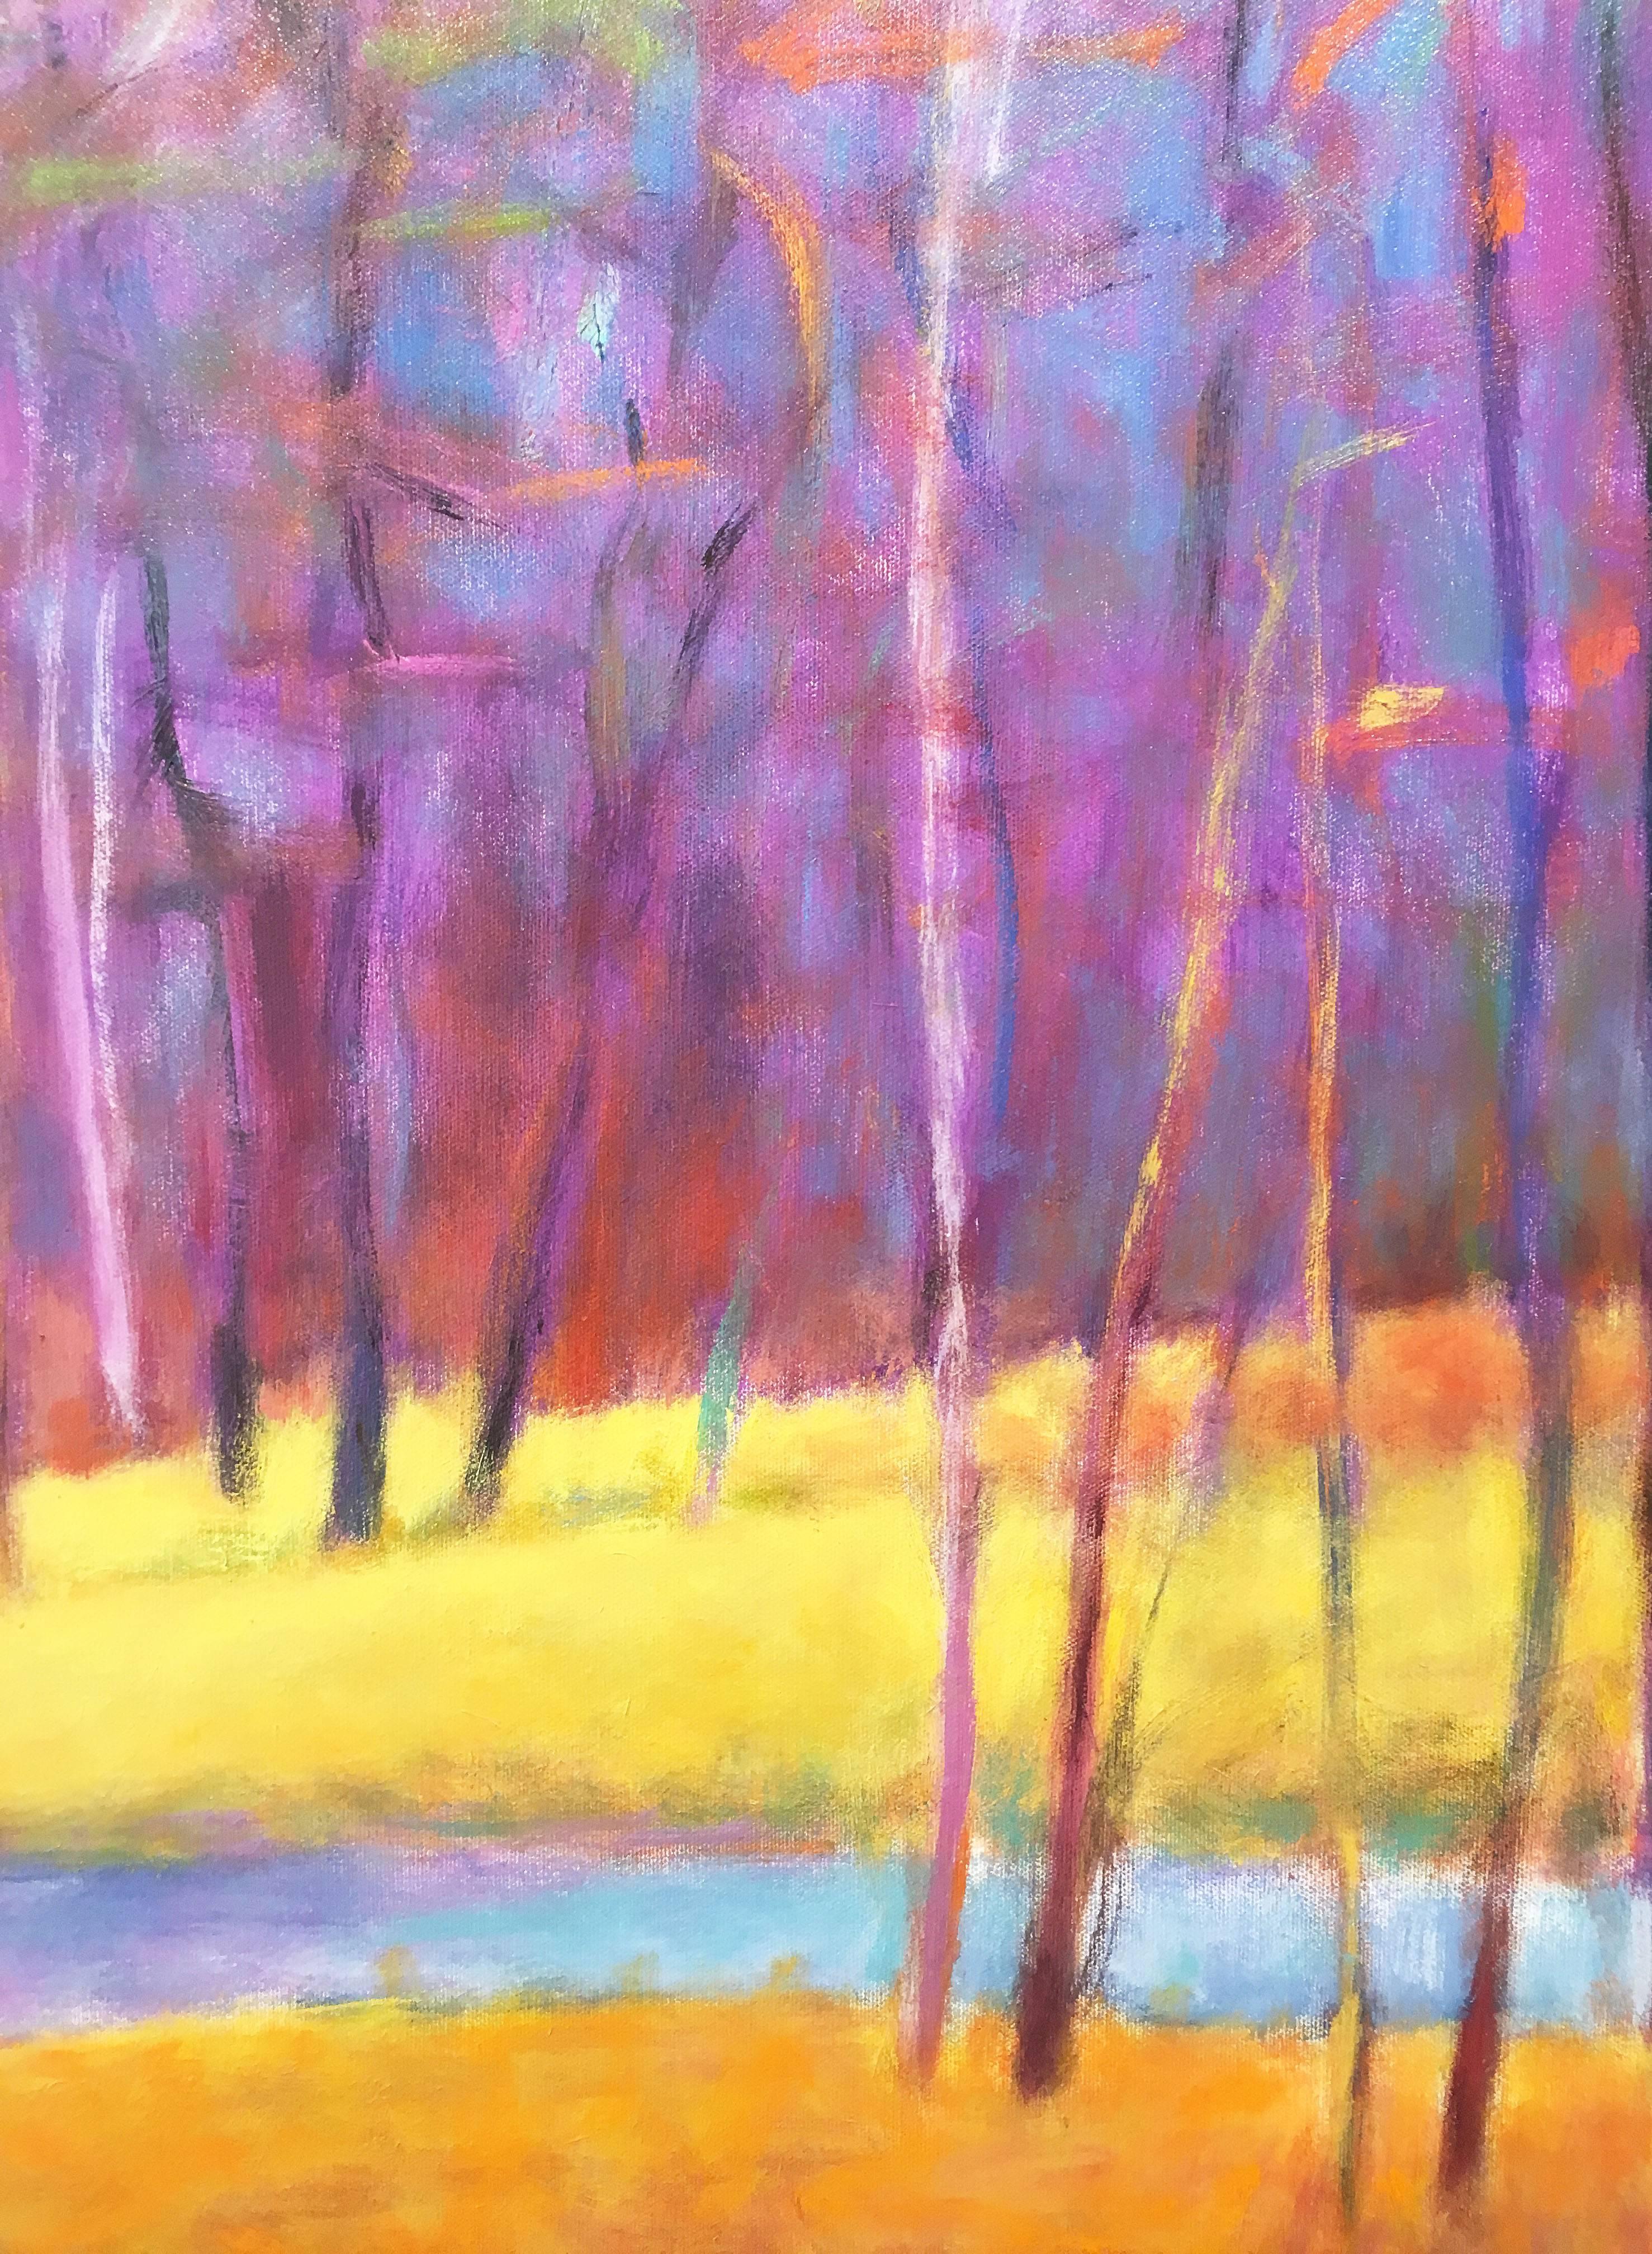 Vibrant, expressionist landscape painting of trees, light and forest in blue, yellow, orange, magenta

The artist studied with American landscape painter Wolf Kahn, early in his career.
